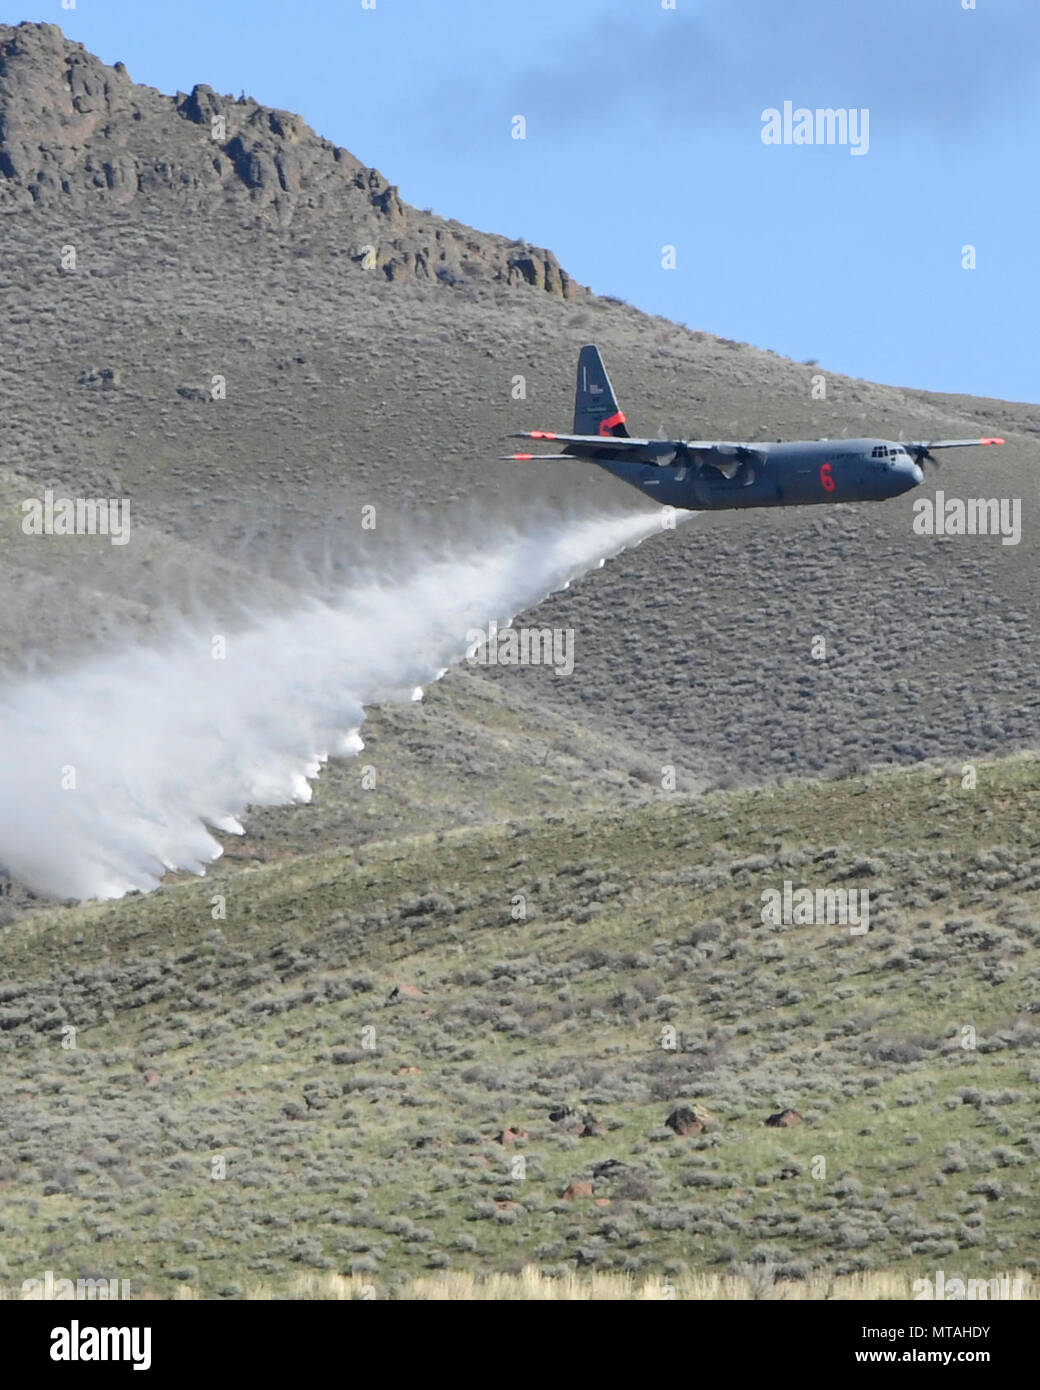 A C130J aircraft loaded with the MAFFS (Modular Airborne Fire Fighting System) from the 146th Airlift Wing of Port Hueneme, California drops a water line while training to contain wildfires just outside Boise, Idaho. April 21, 2017. More than 400 personnel of four C-130 Guard and Reserve units — from California, Colorado, Nevada and Wyoming, making up the Air Expeditionary Group — are in Boise, Idaho for the week-long wildfire training and certification sponsored by the U.S. Stock Photo